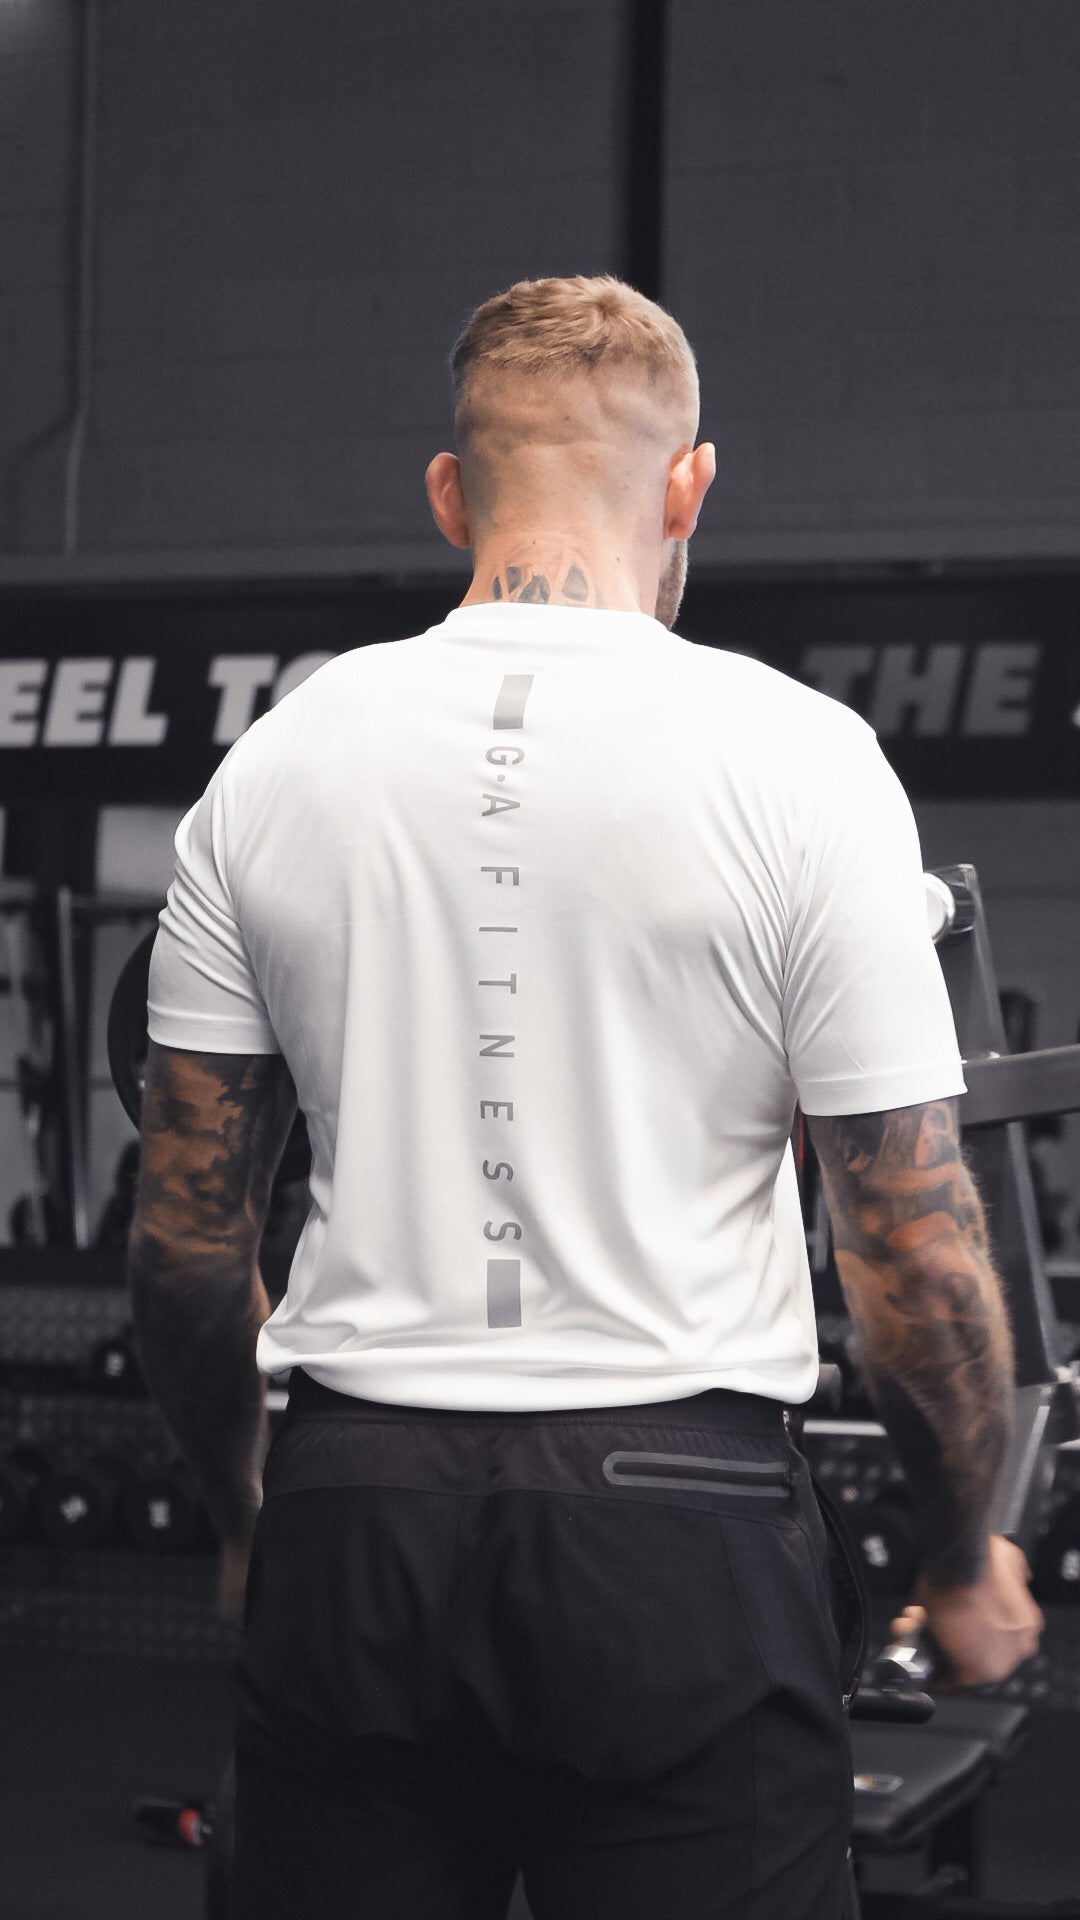 Artic White performance top back